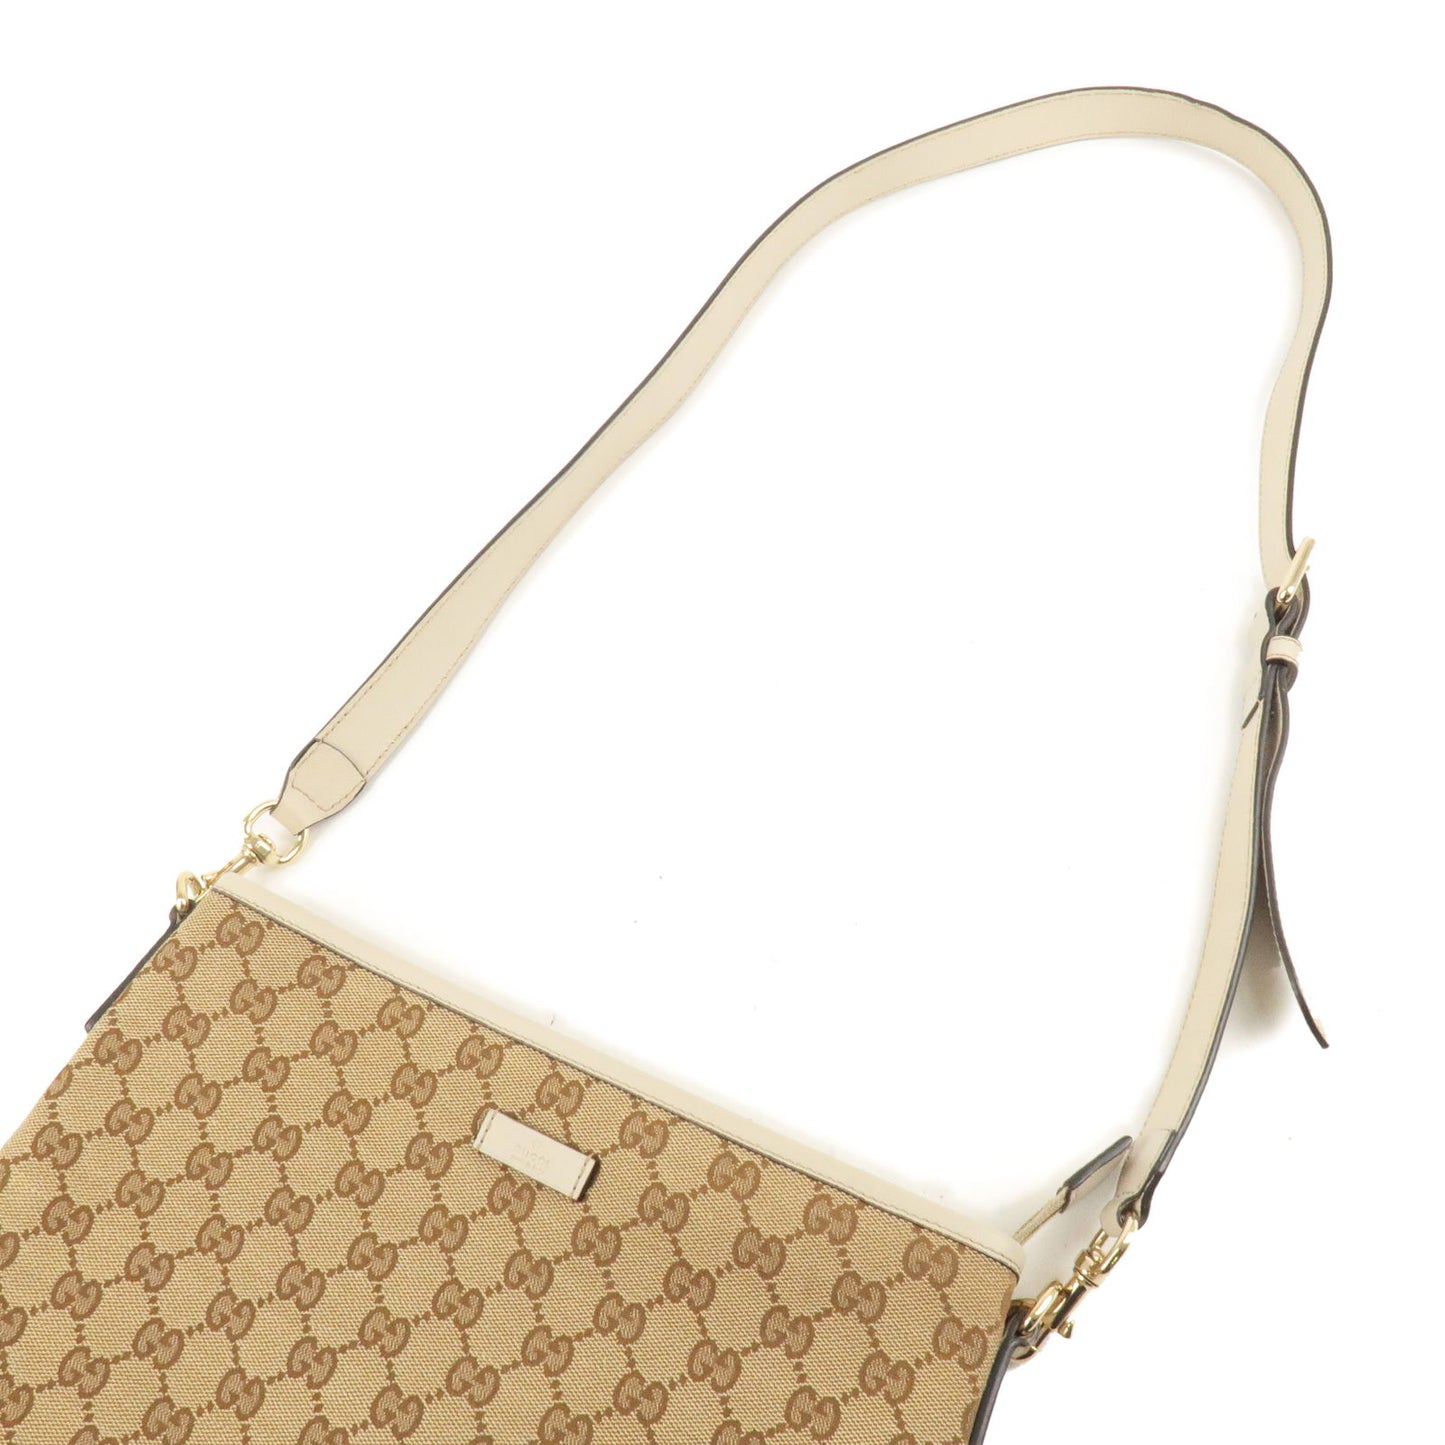 GUCCI GG Canvas Leather Shouler Bag Beige Brown 388924